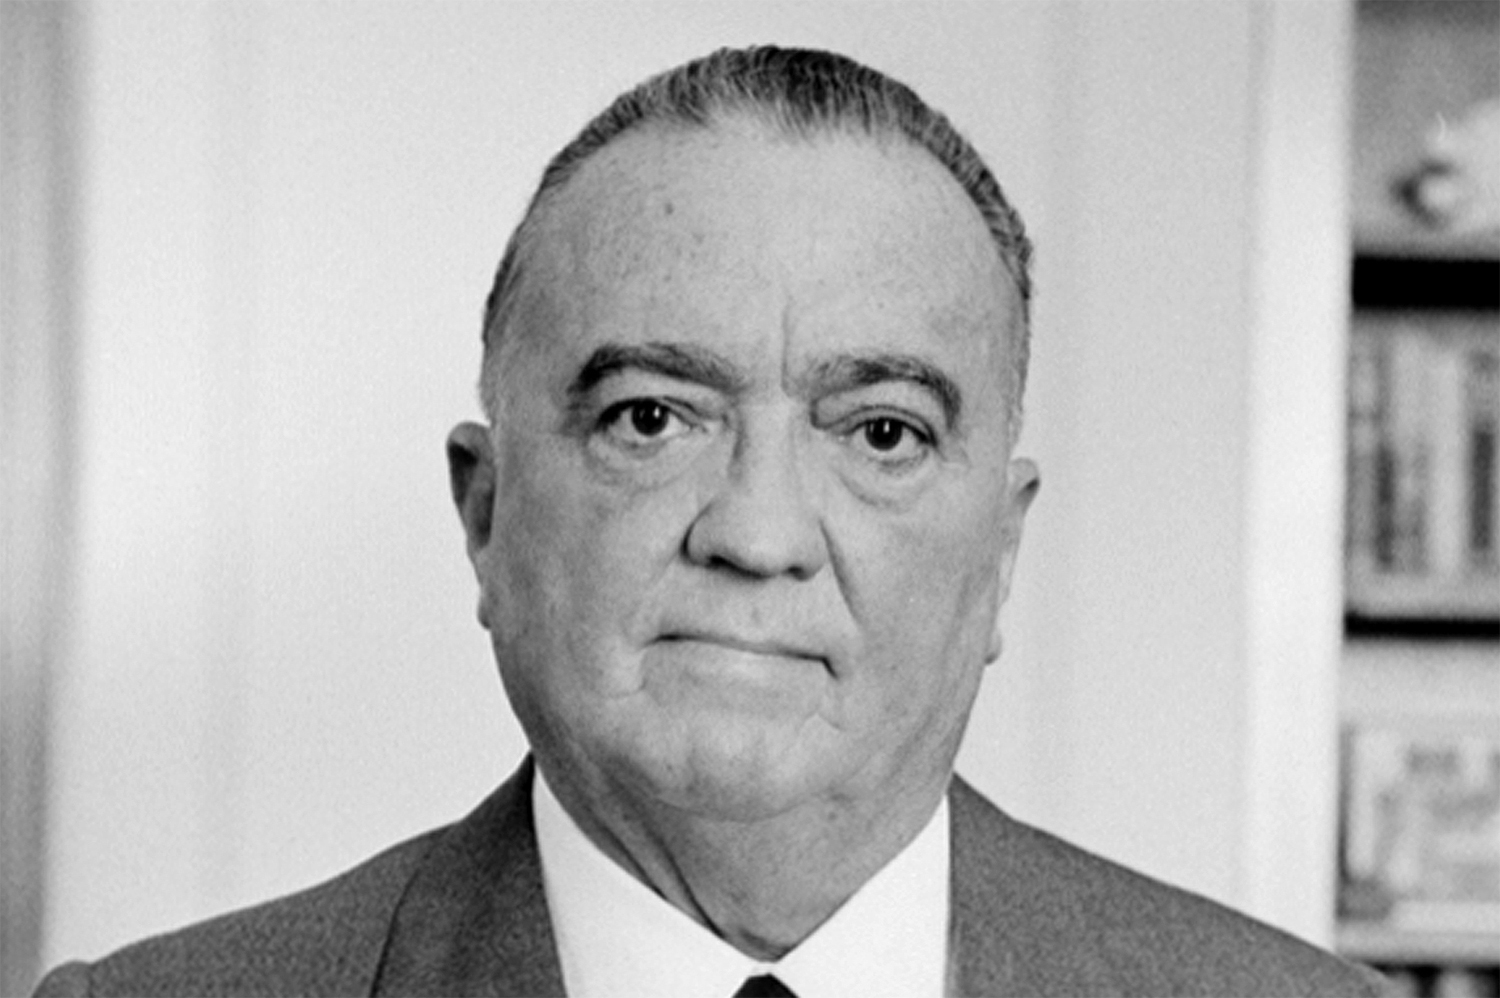 The rise of J. Edgar Hoover and his FBI